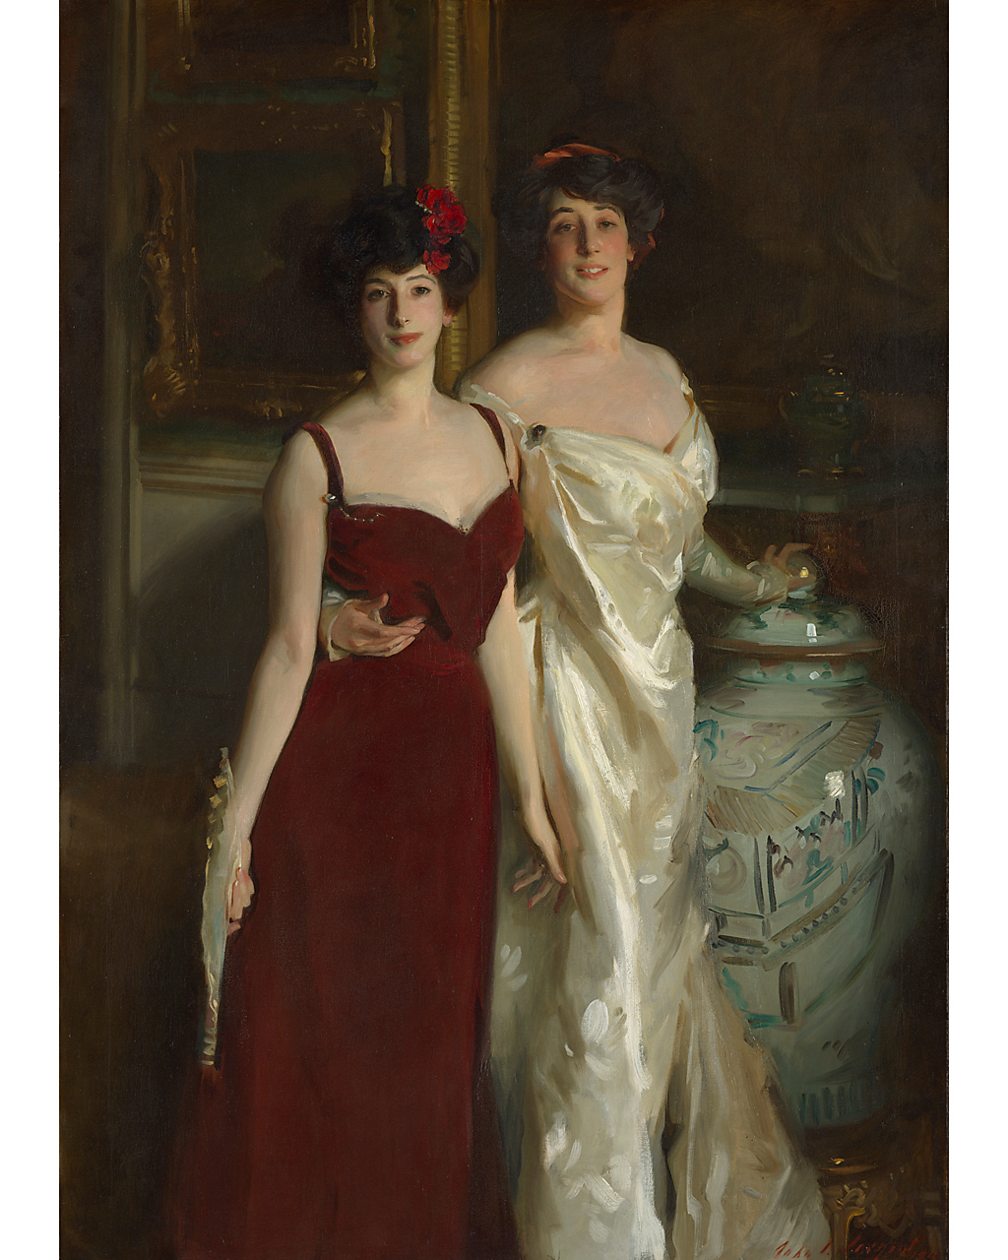 Museum of Fine Arts Boston Ena and Betty, Daughters of Asher and Mrs Wertheimer was one of 12 portraits of the family that Sargent was commissioned to paint (Credit: Museum of Fine Arts Boston)